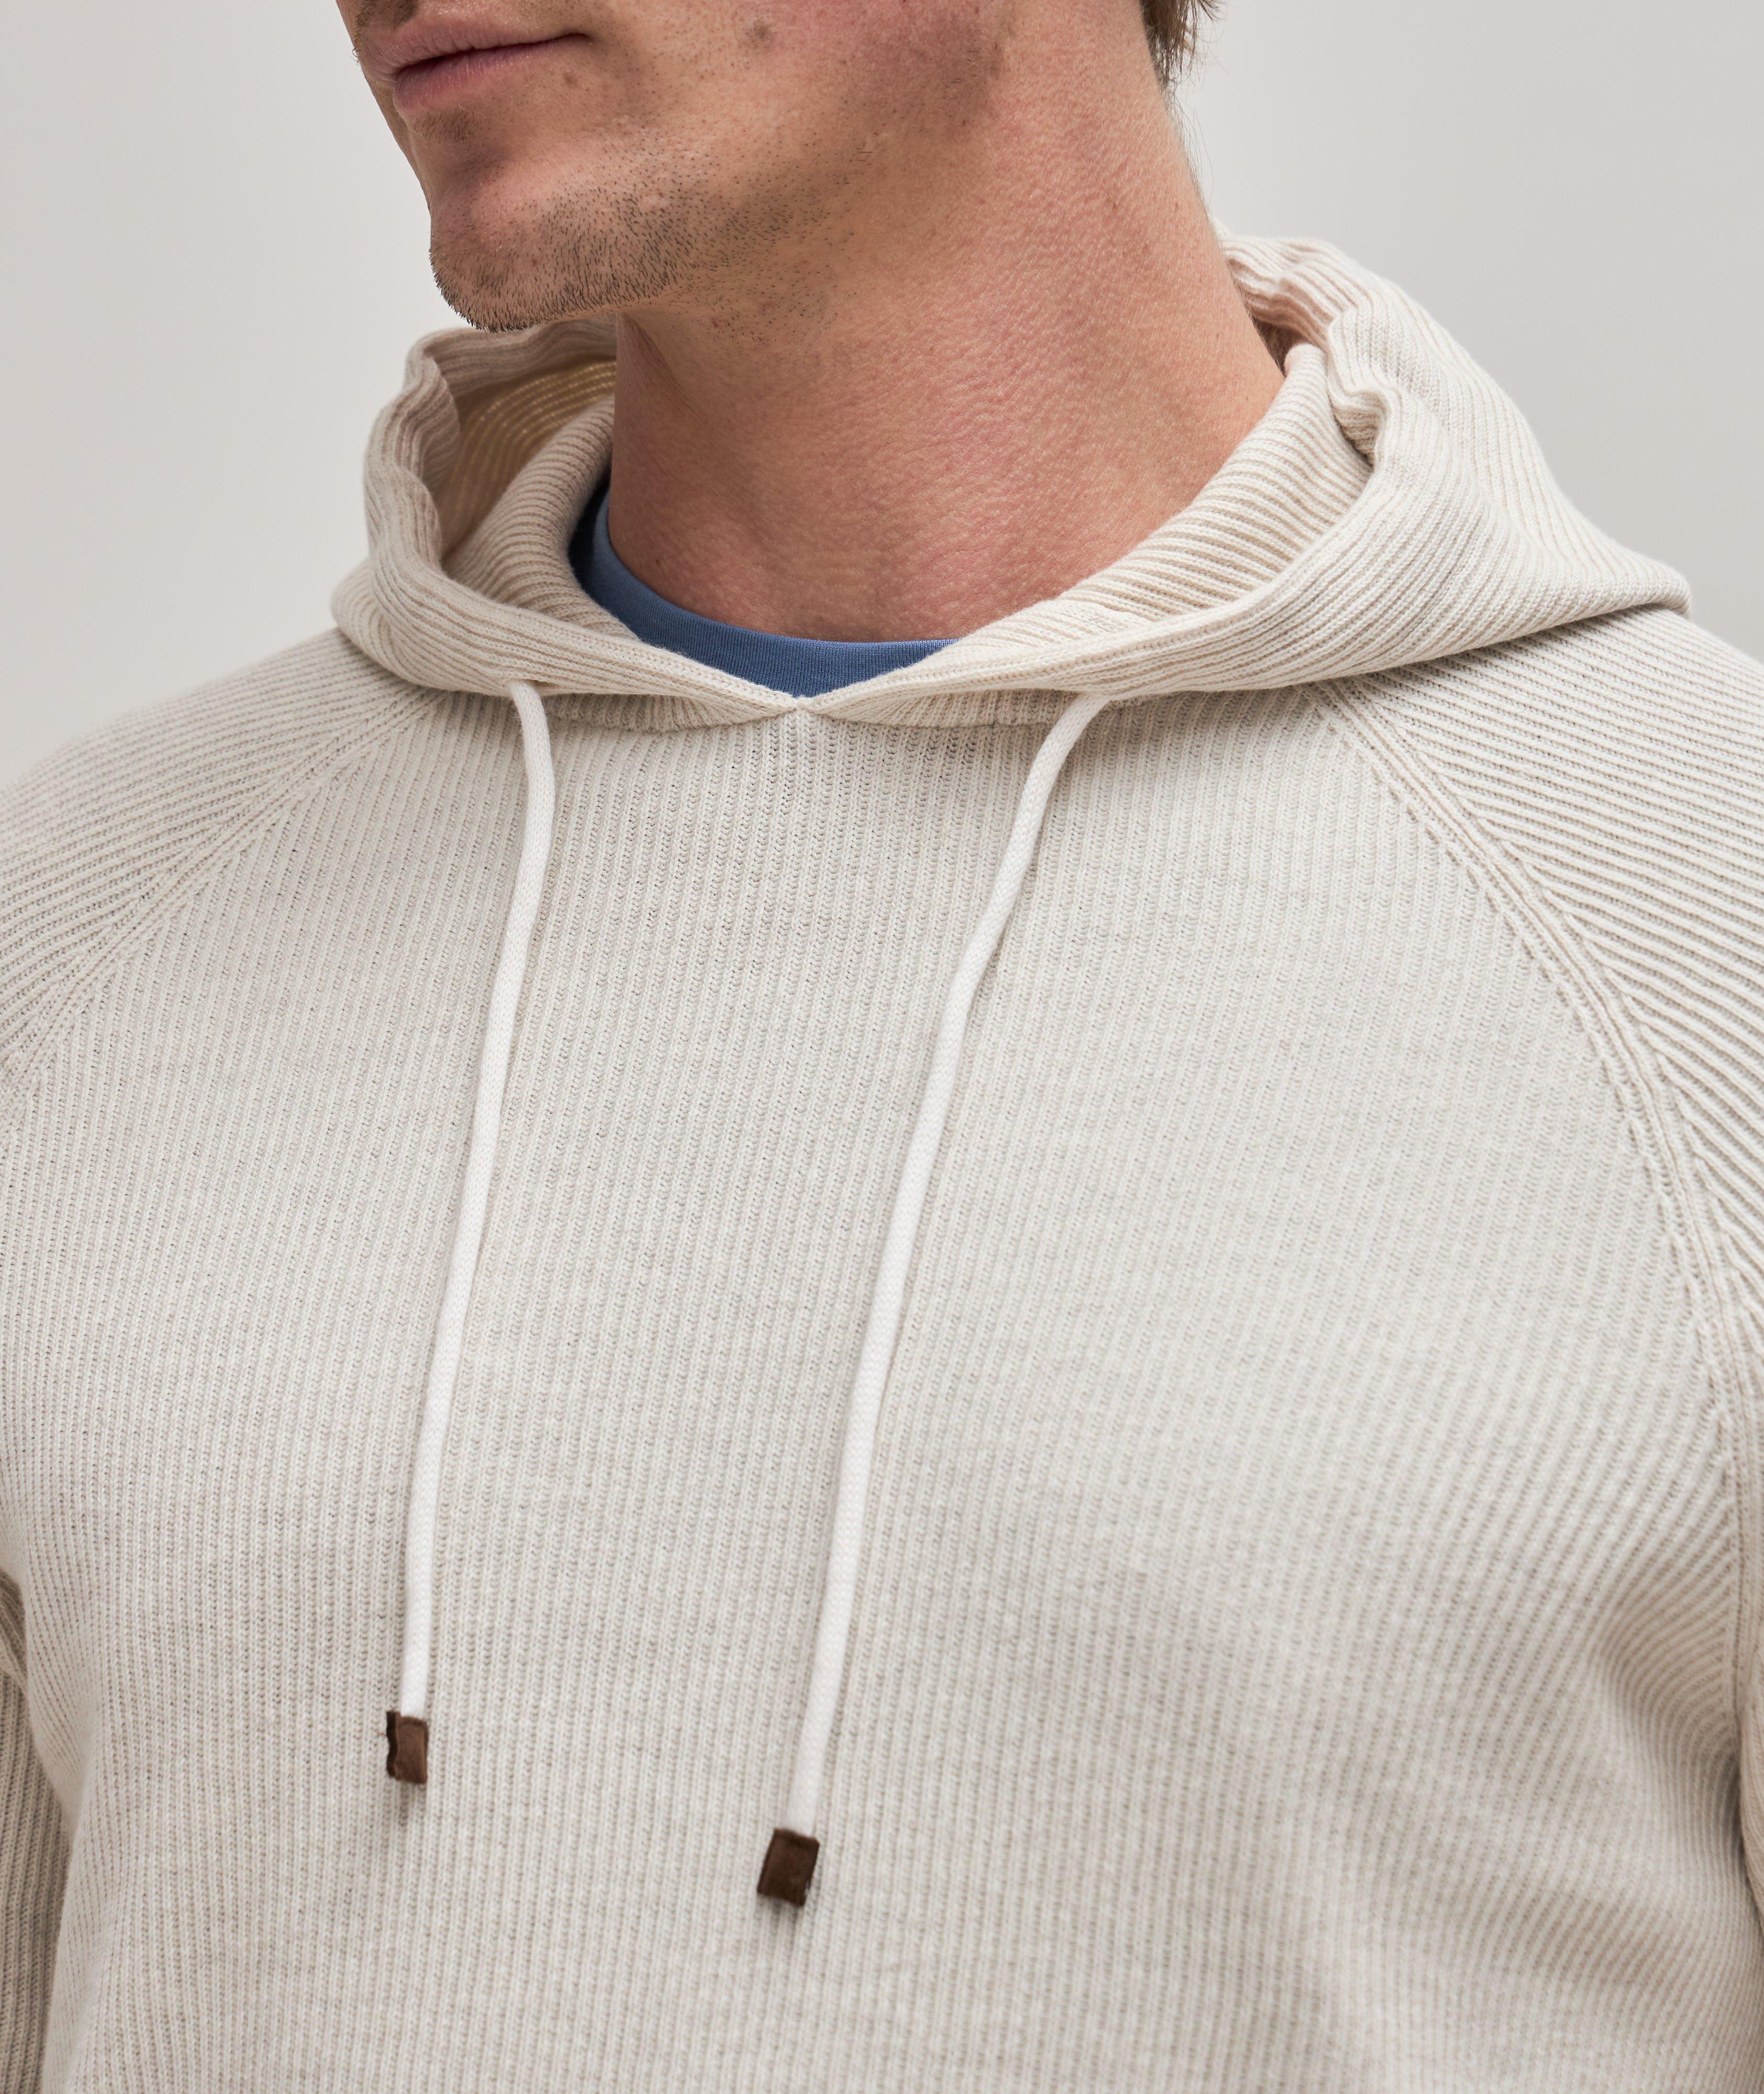 Cotton Rib Knit Hooded Pullover image 4